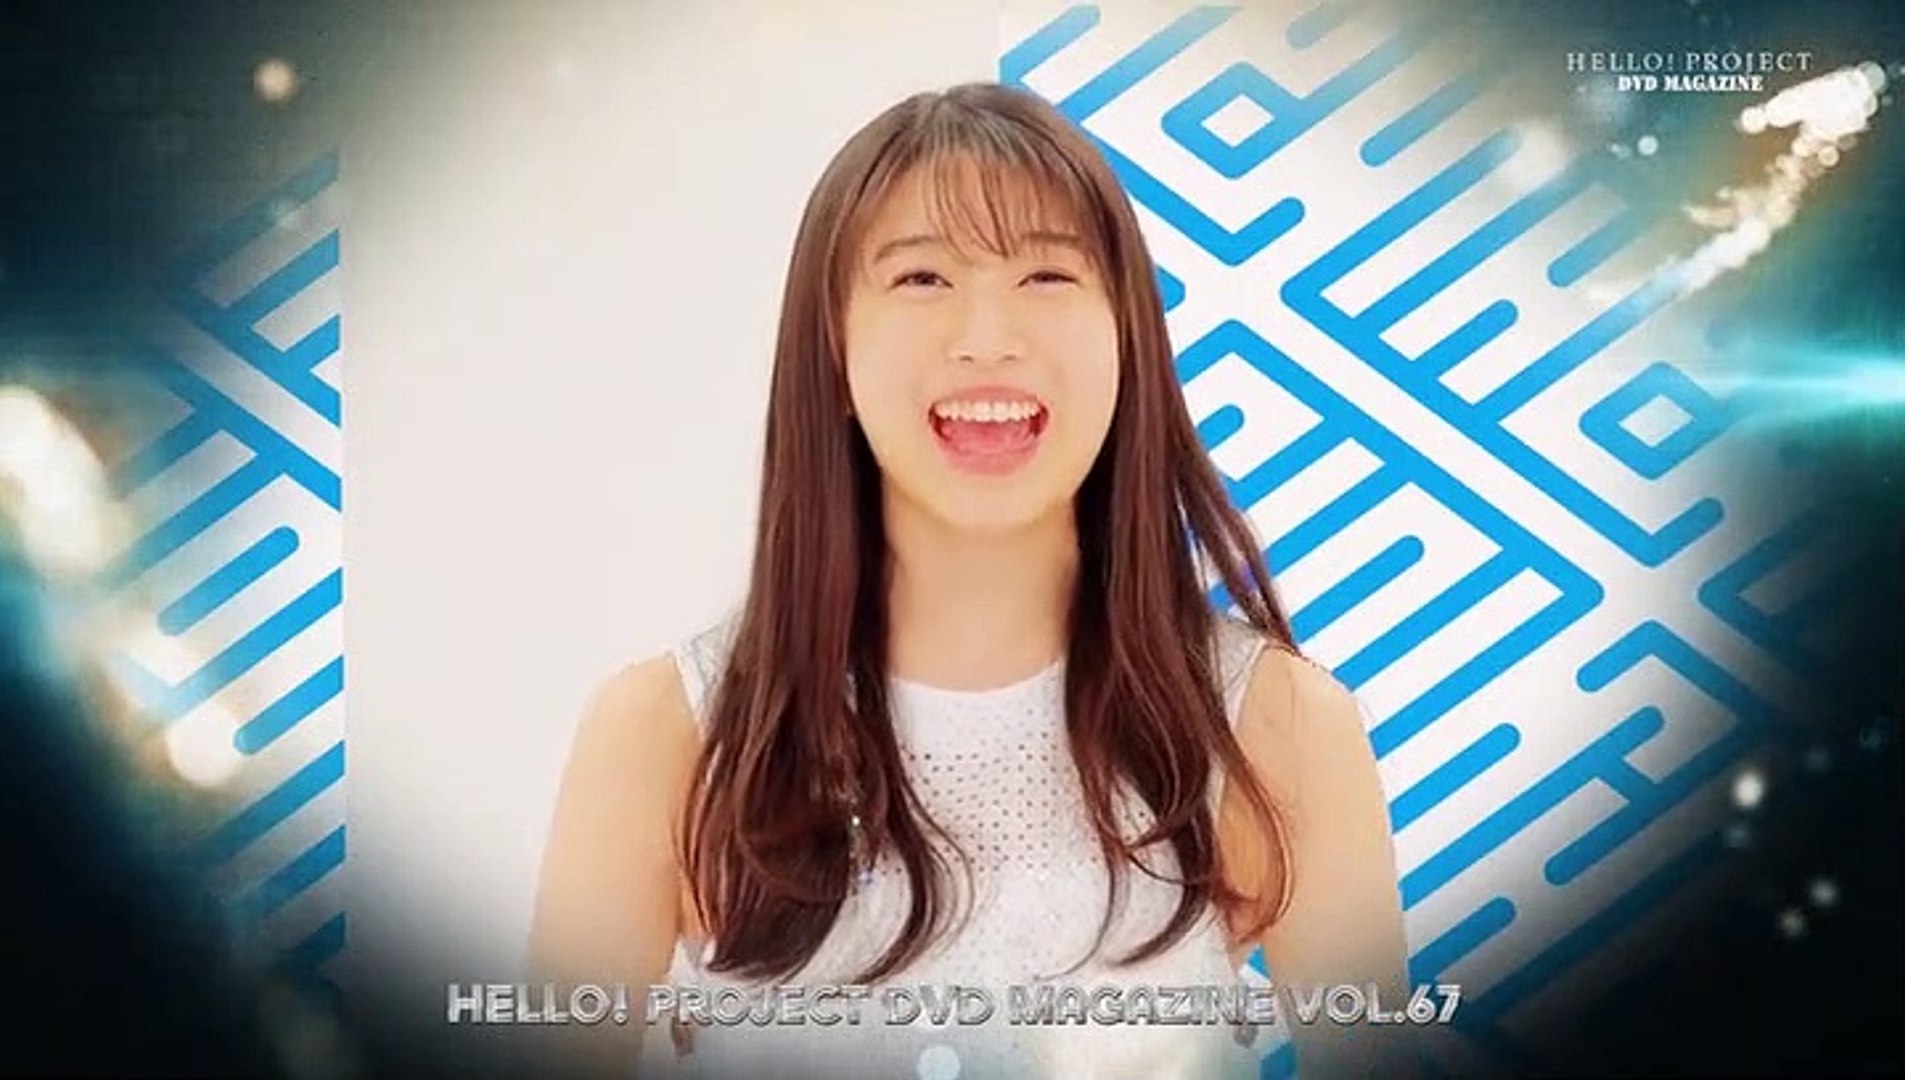 Hello! Project Dvd Magazine Vol.67 Disc 1 Part 1 - video Dailymotion